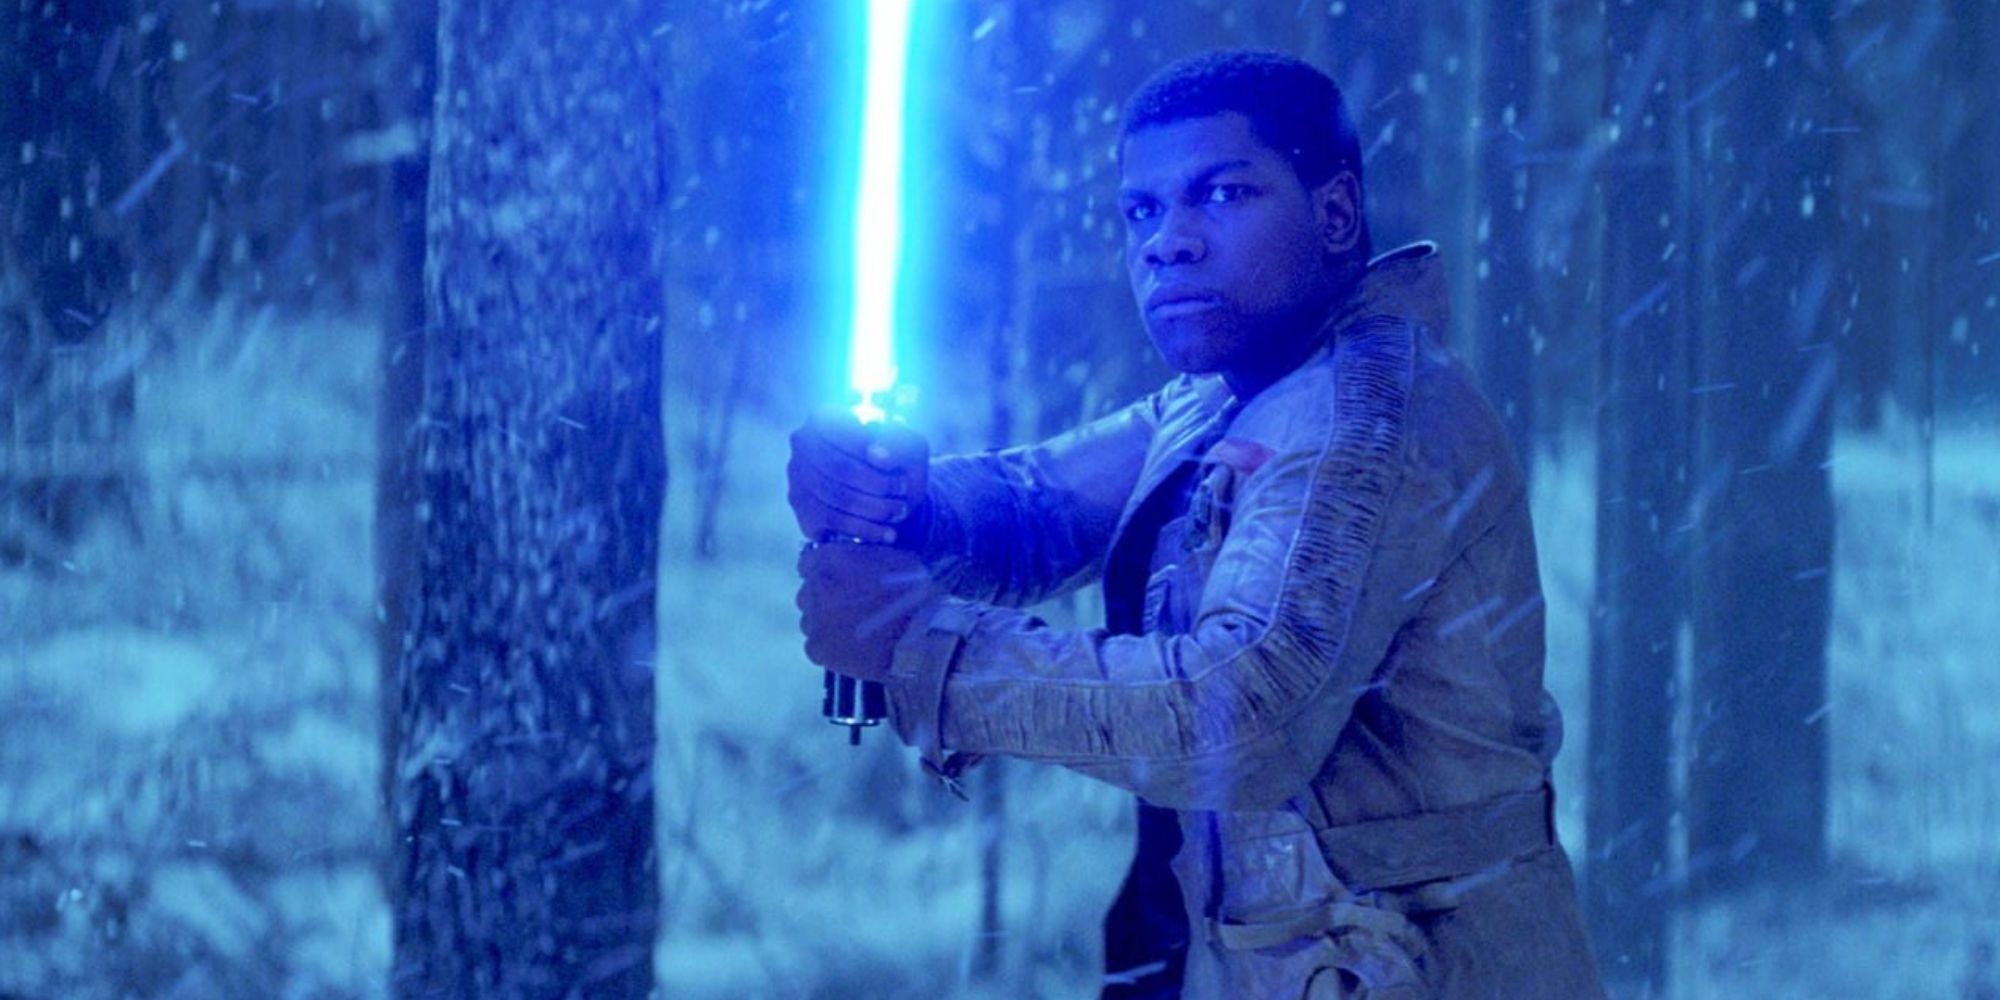 Finn holding a lightsaber in the snow from 'Star Wars: Episode VII - The Force Awakens'